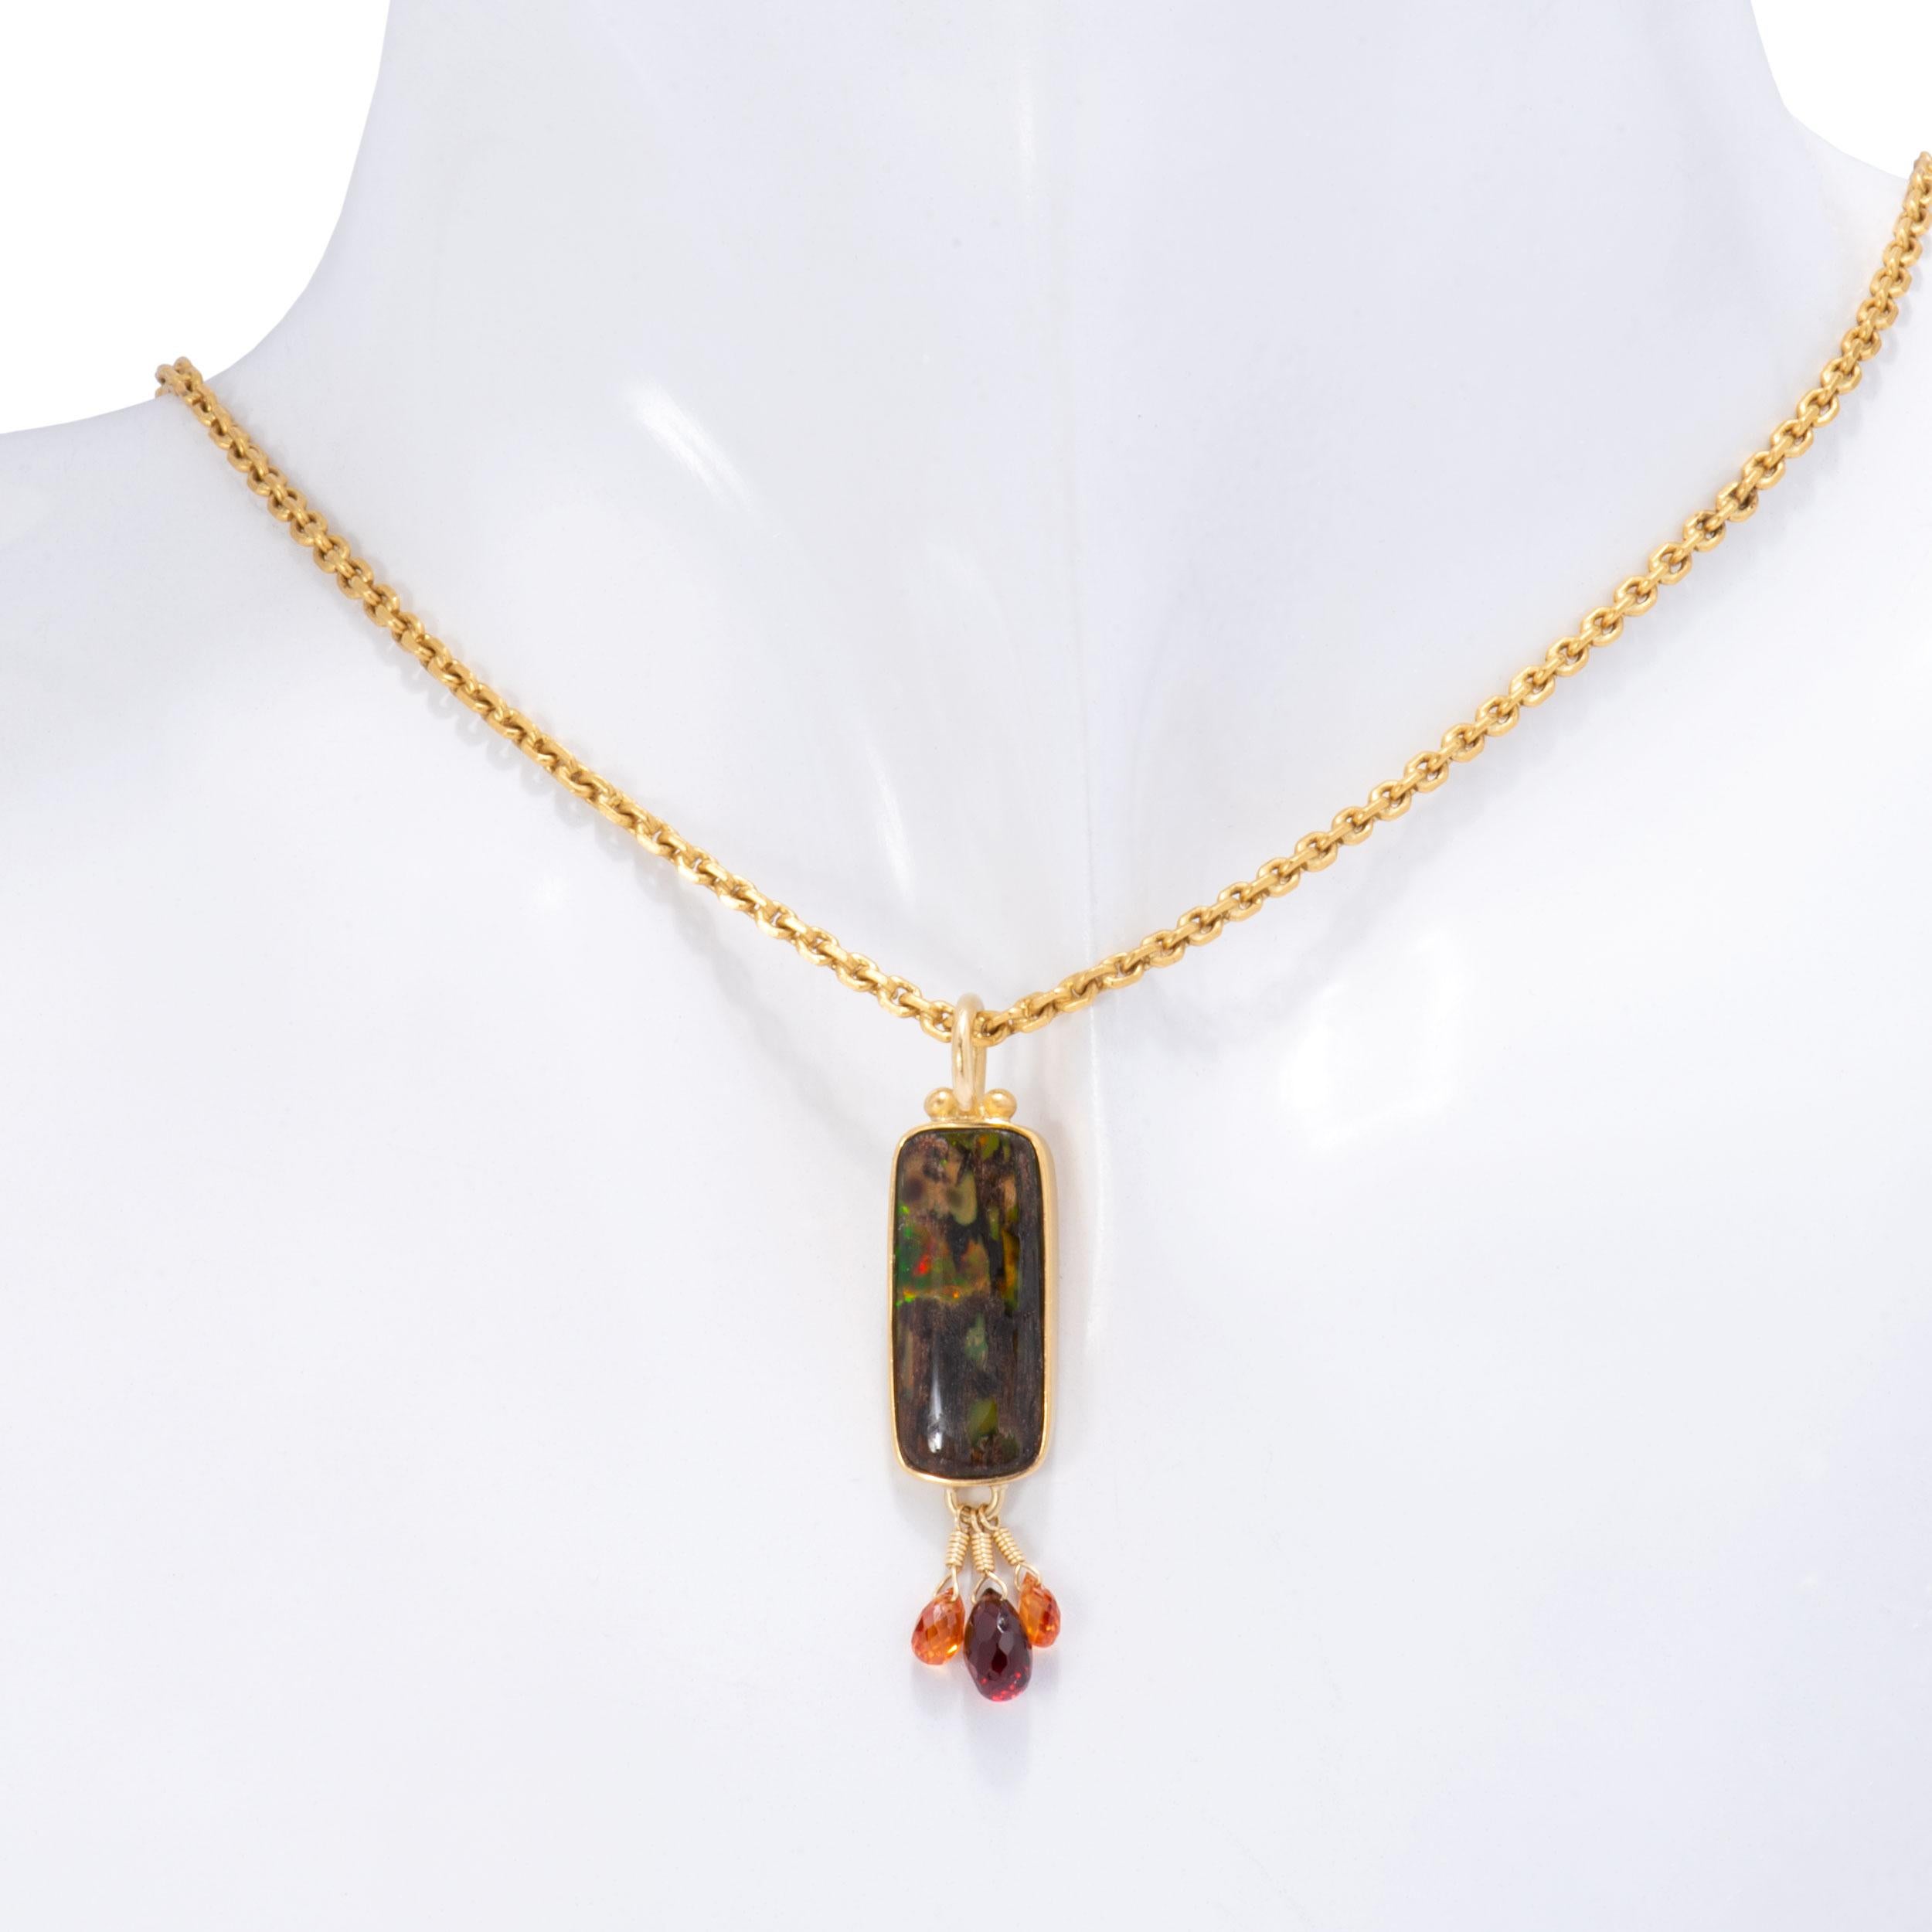 Nevada Wood Opal Pendant with Garnet and Sapphire Briolettes in 22k and 18k Gold In New Condition For Sale In Santa Fe, NM